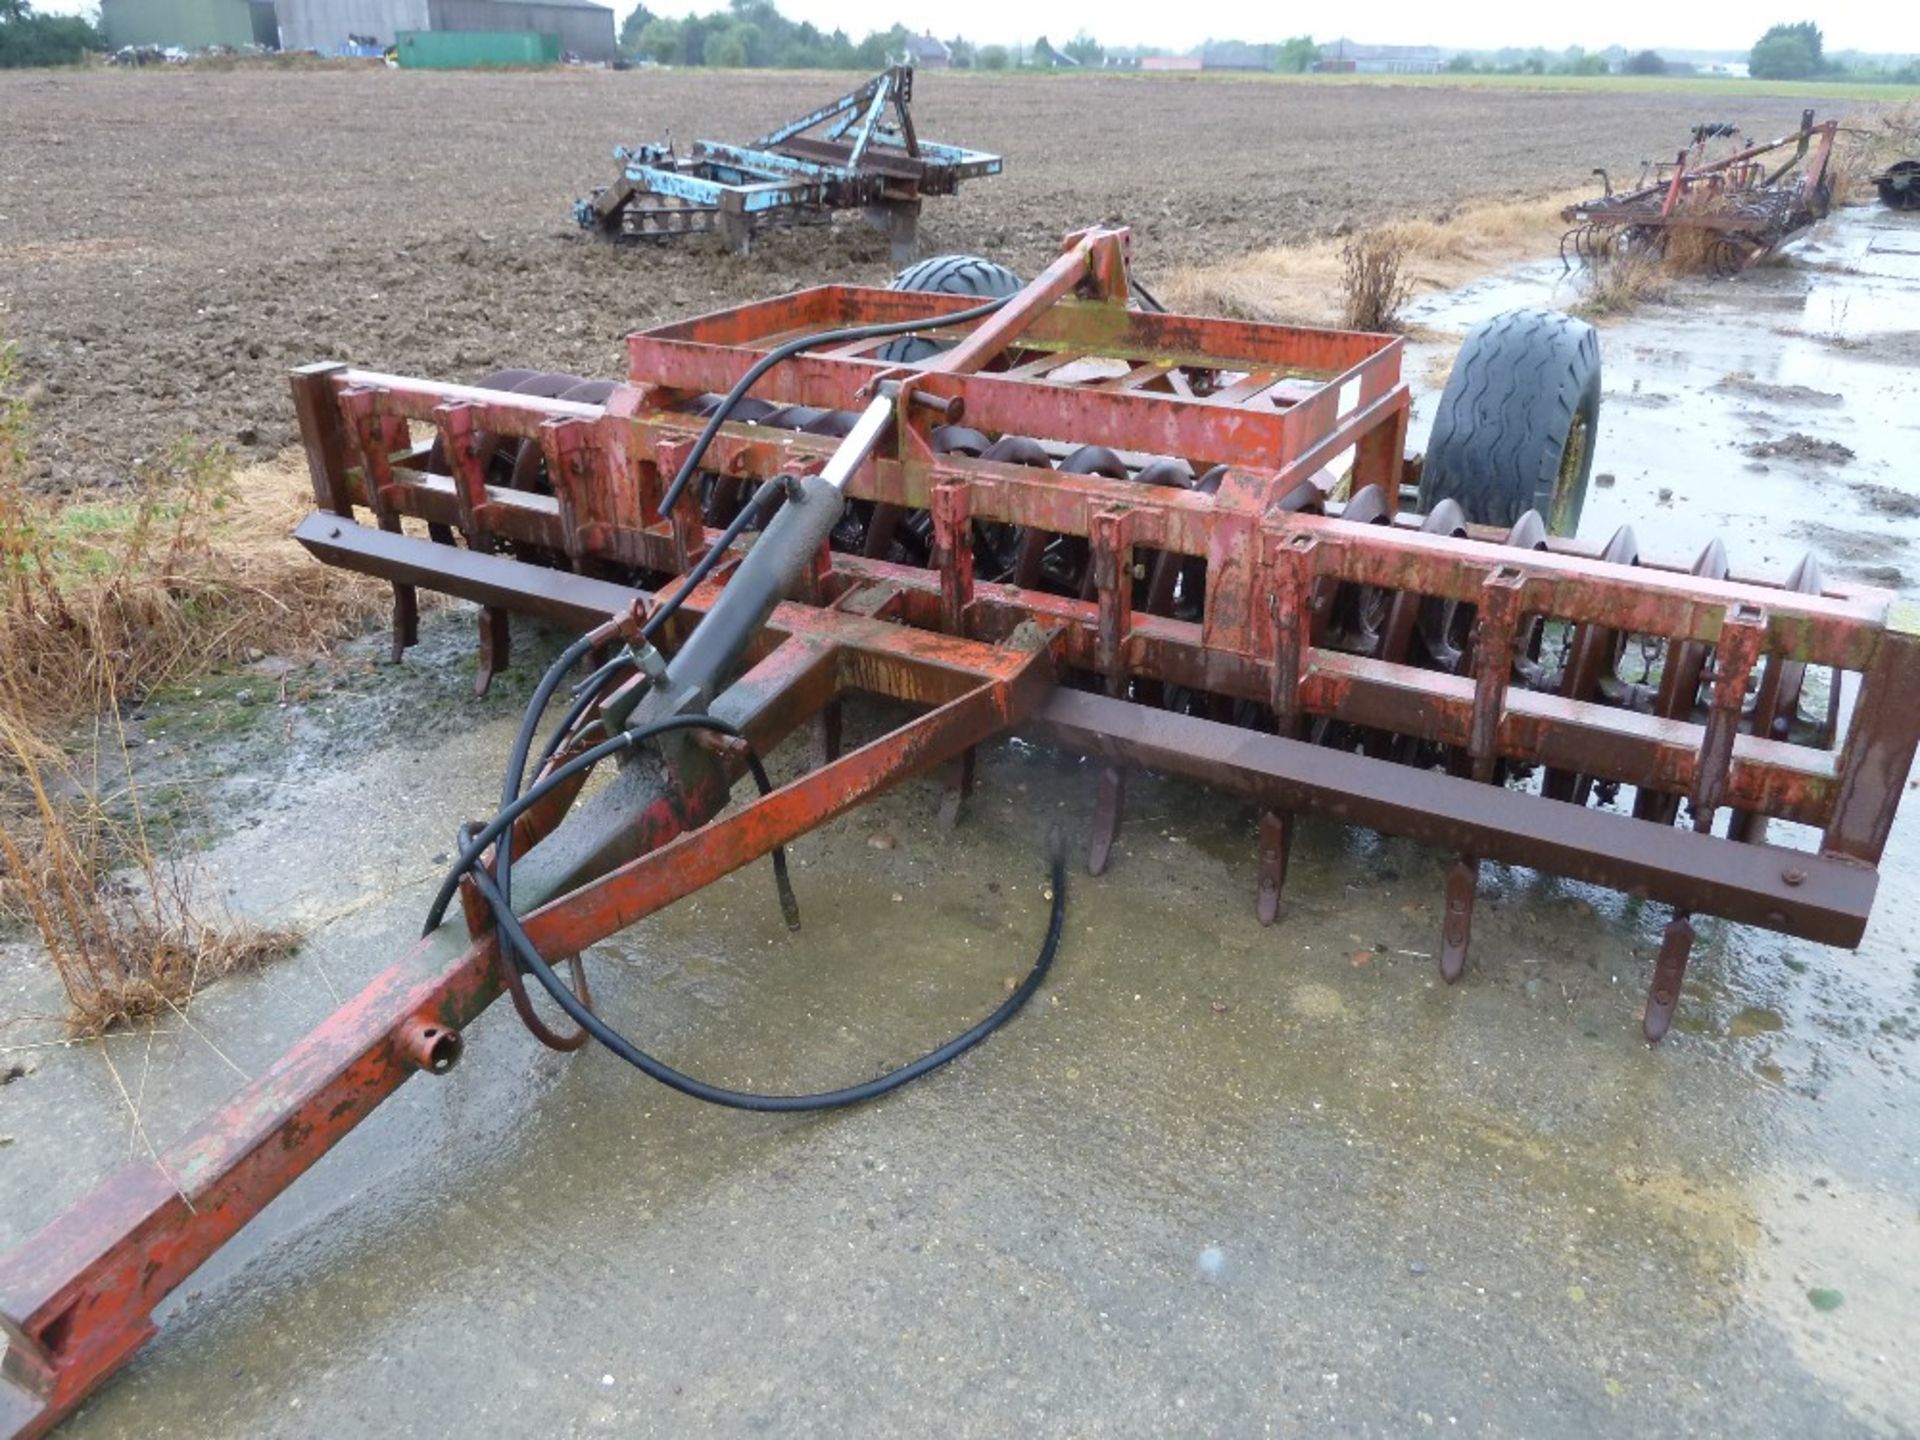 Farmforce press, 3.5m, levelling board, levelling tines.